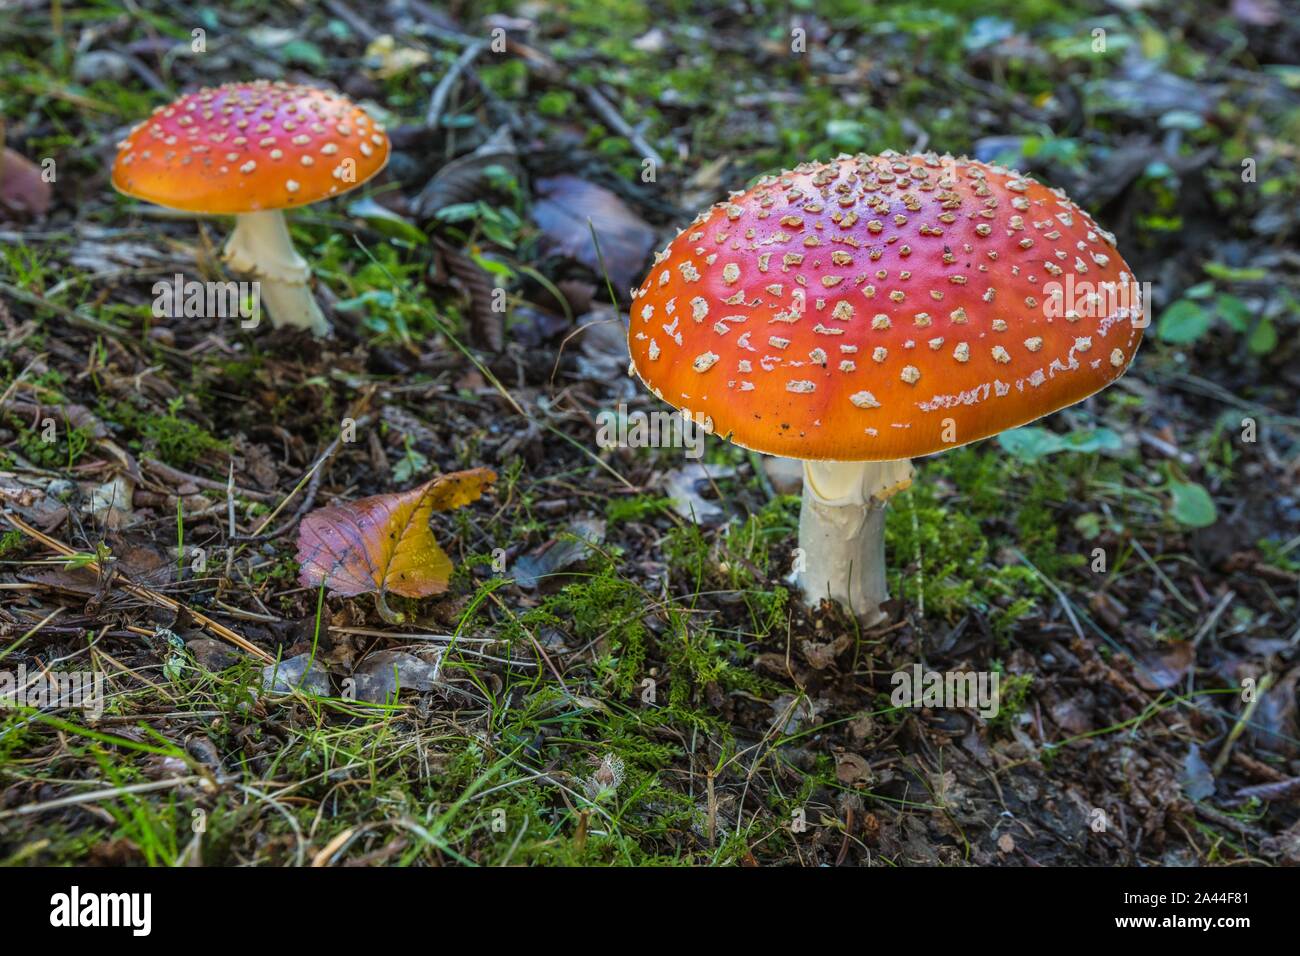 Two red fly agaric mushrooms with white-spotted caps growing in a forest on a sunny autumn day. Green grass, moss and dry leaves on ground. Stock Photo